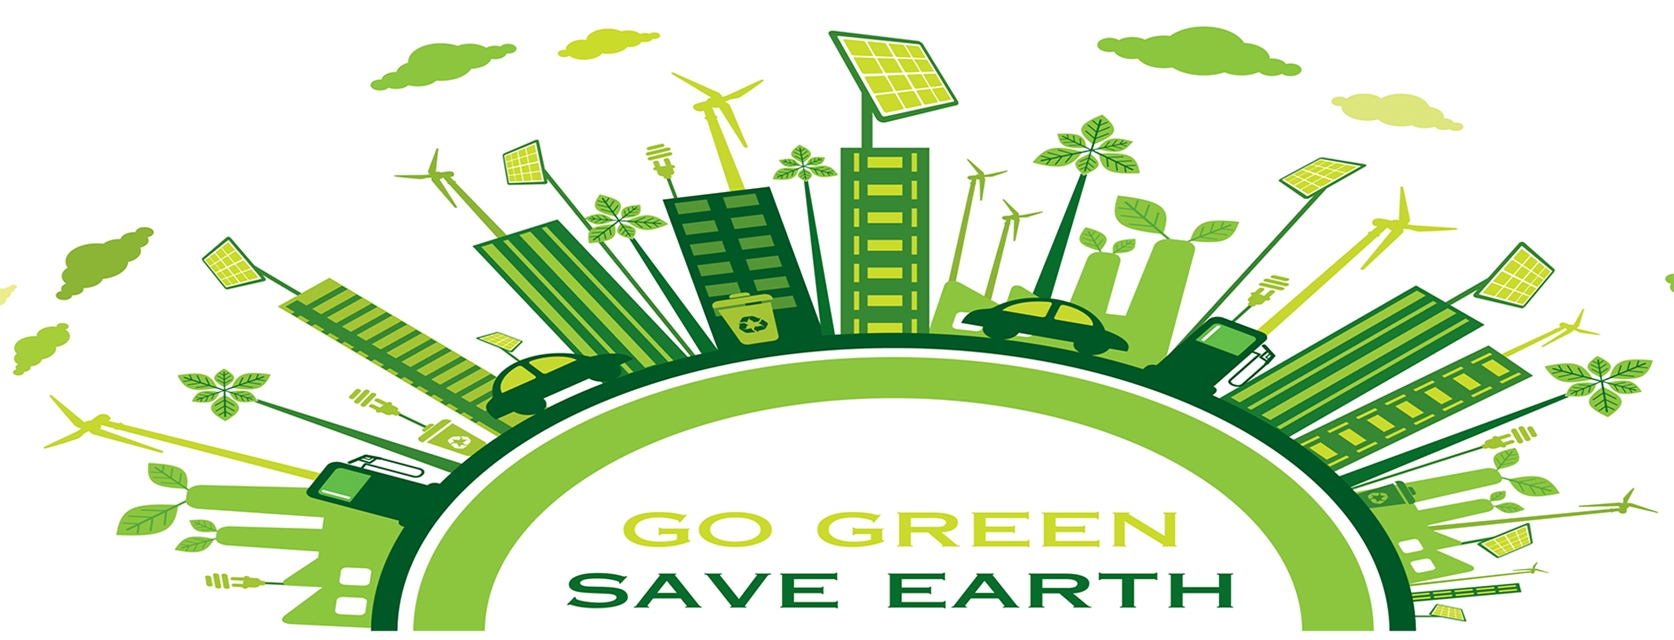 Go green and Save Earth